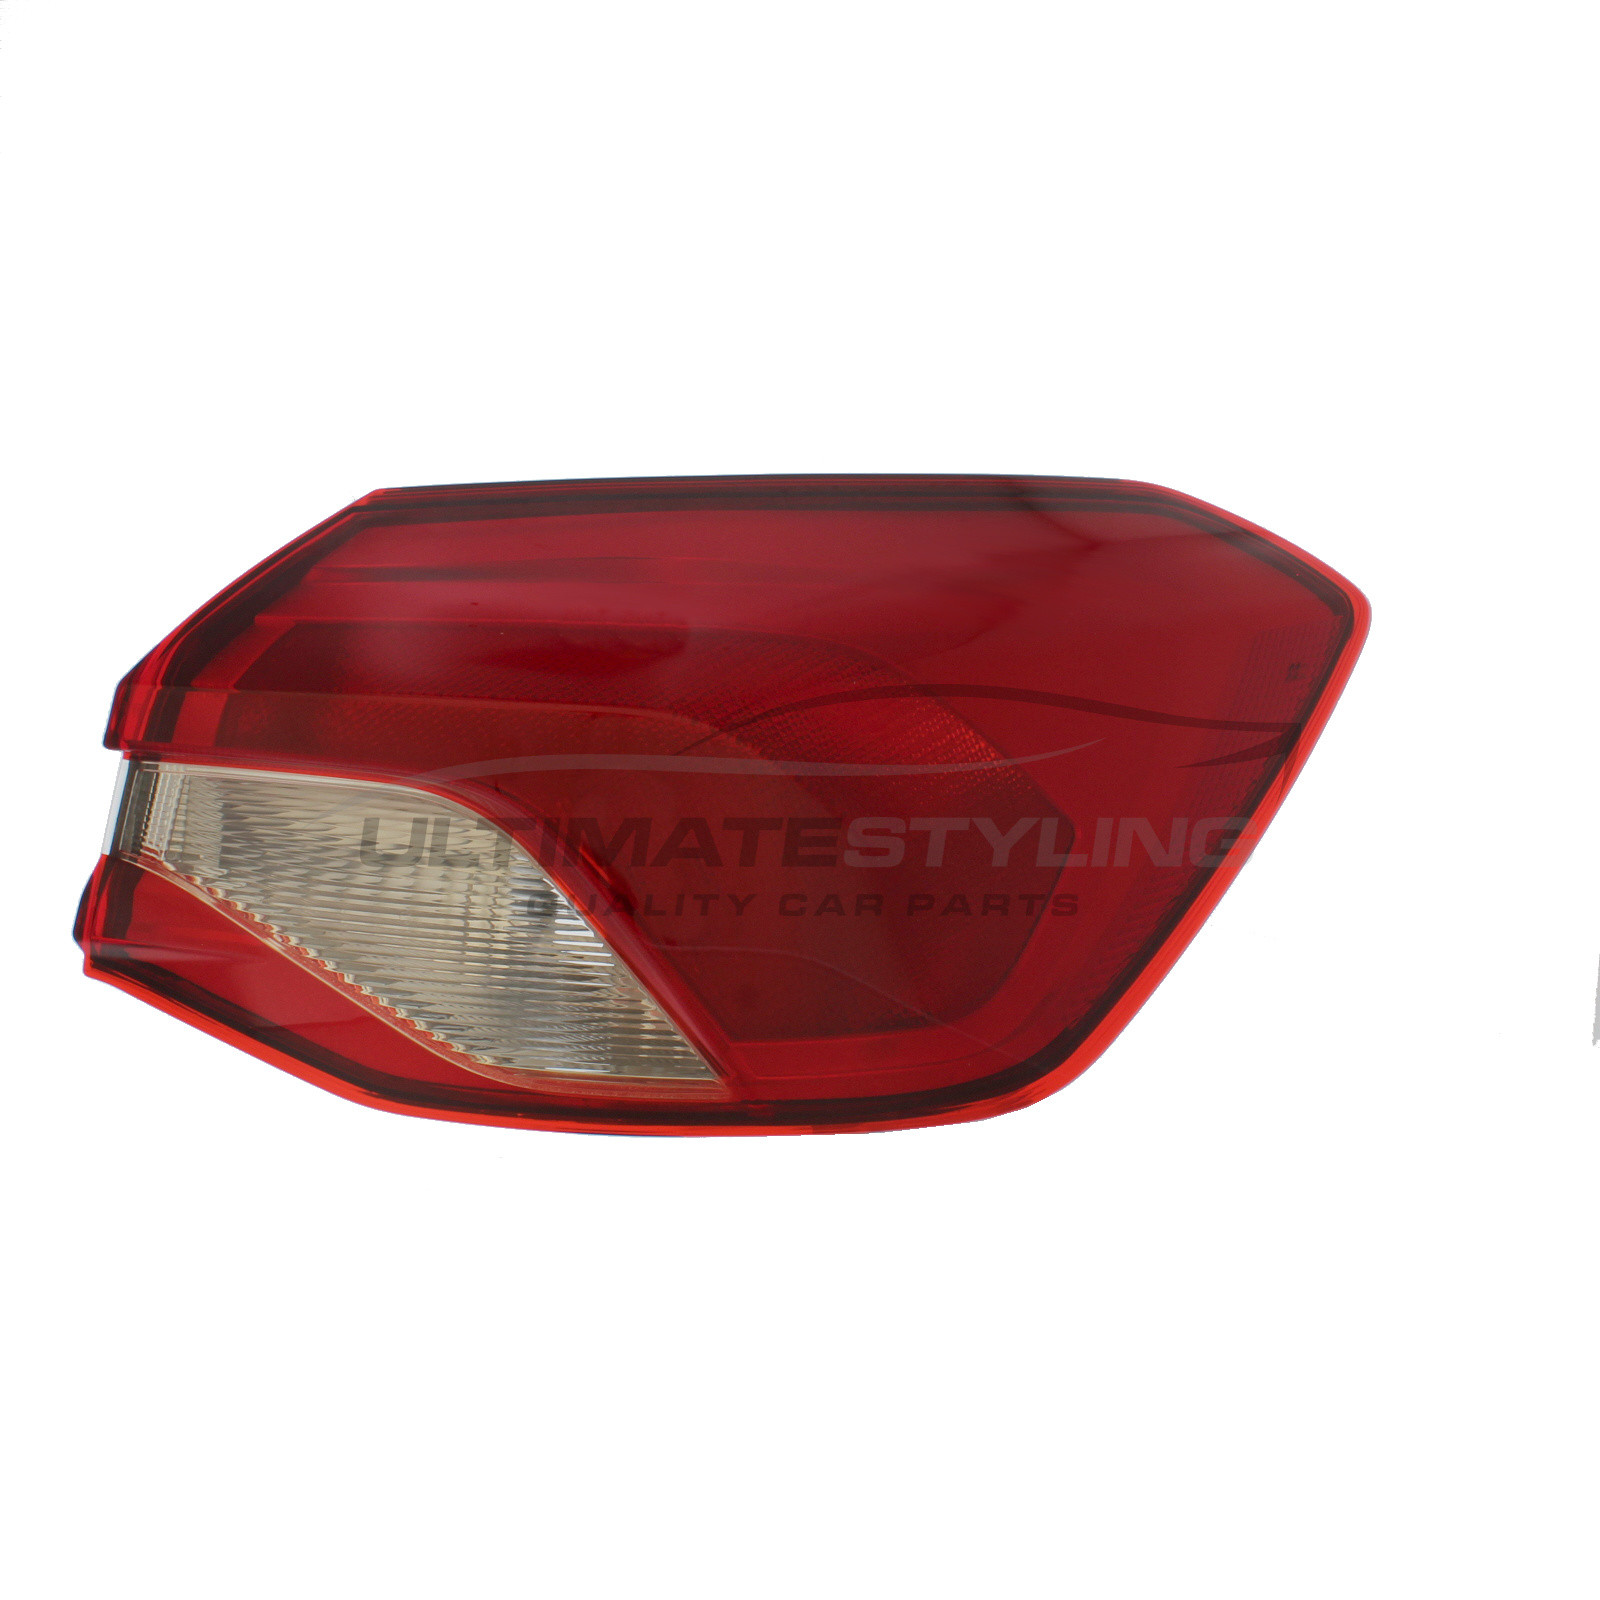 Rear Light / Tail Light for Ford Focus Active